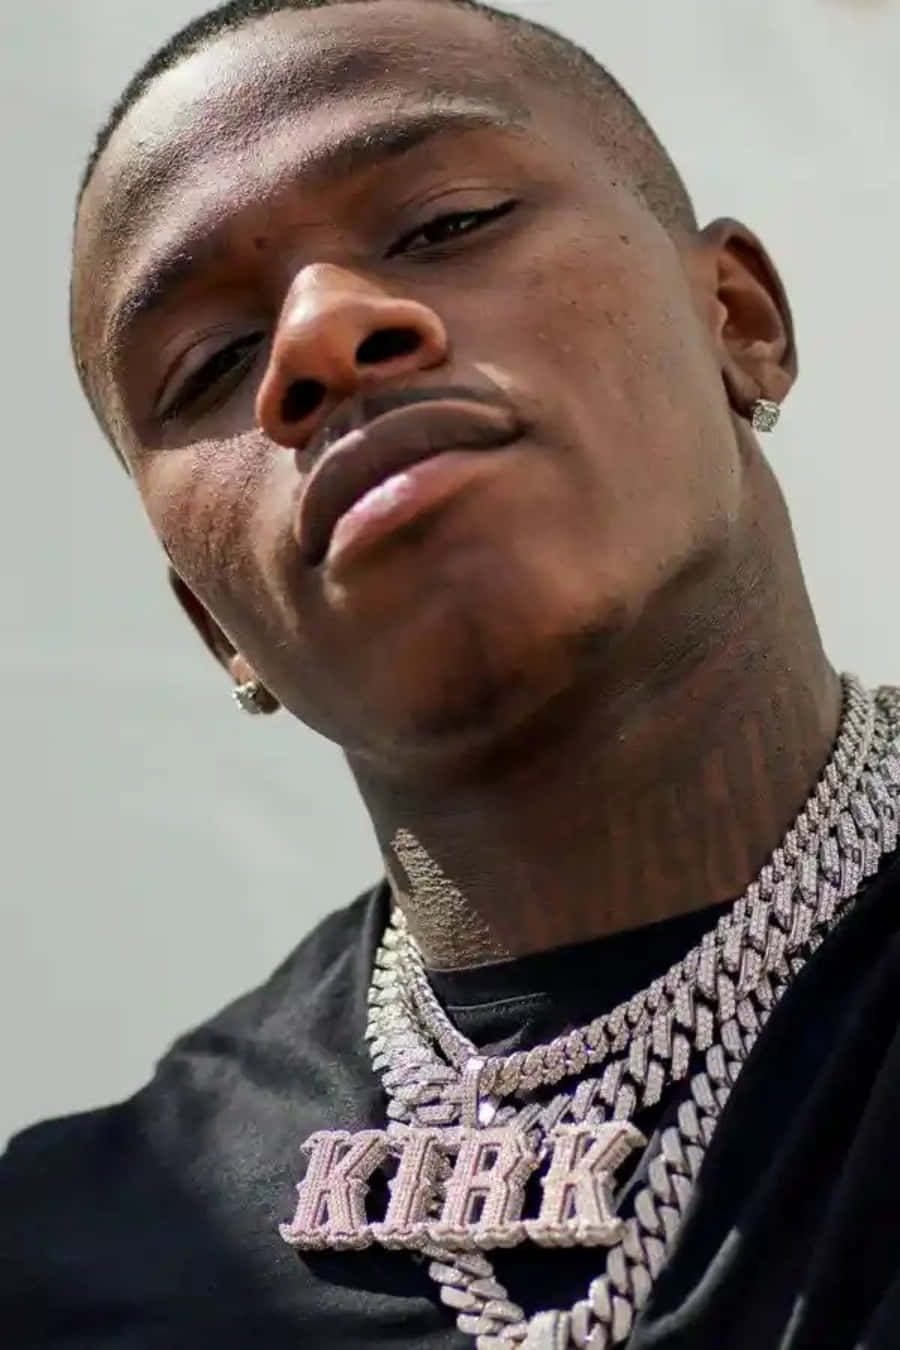 DaBaby in casual style, posing in front of a graffiti background